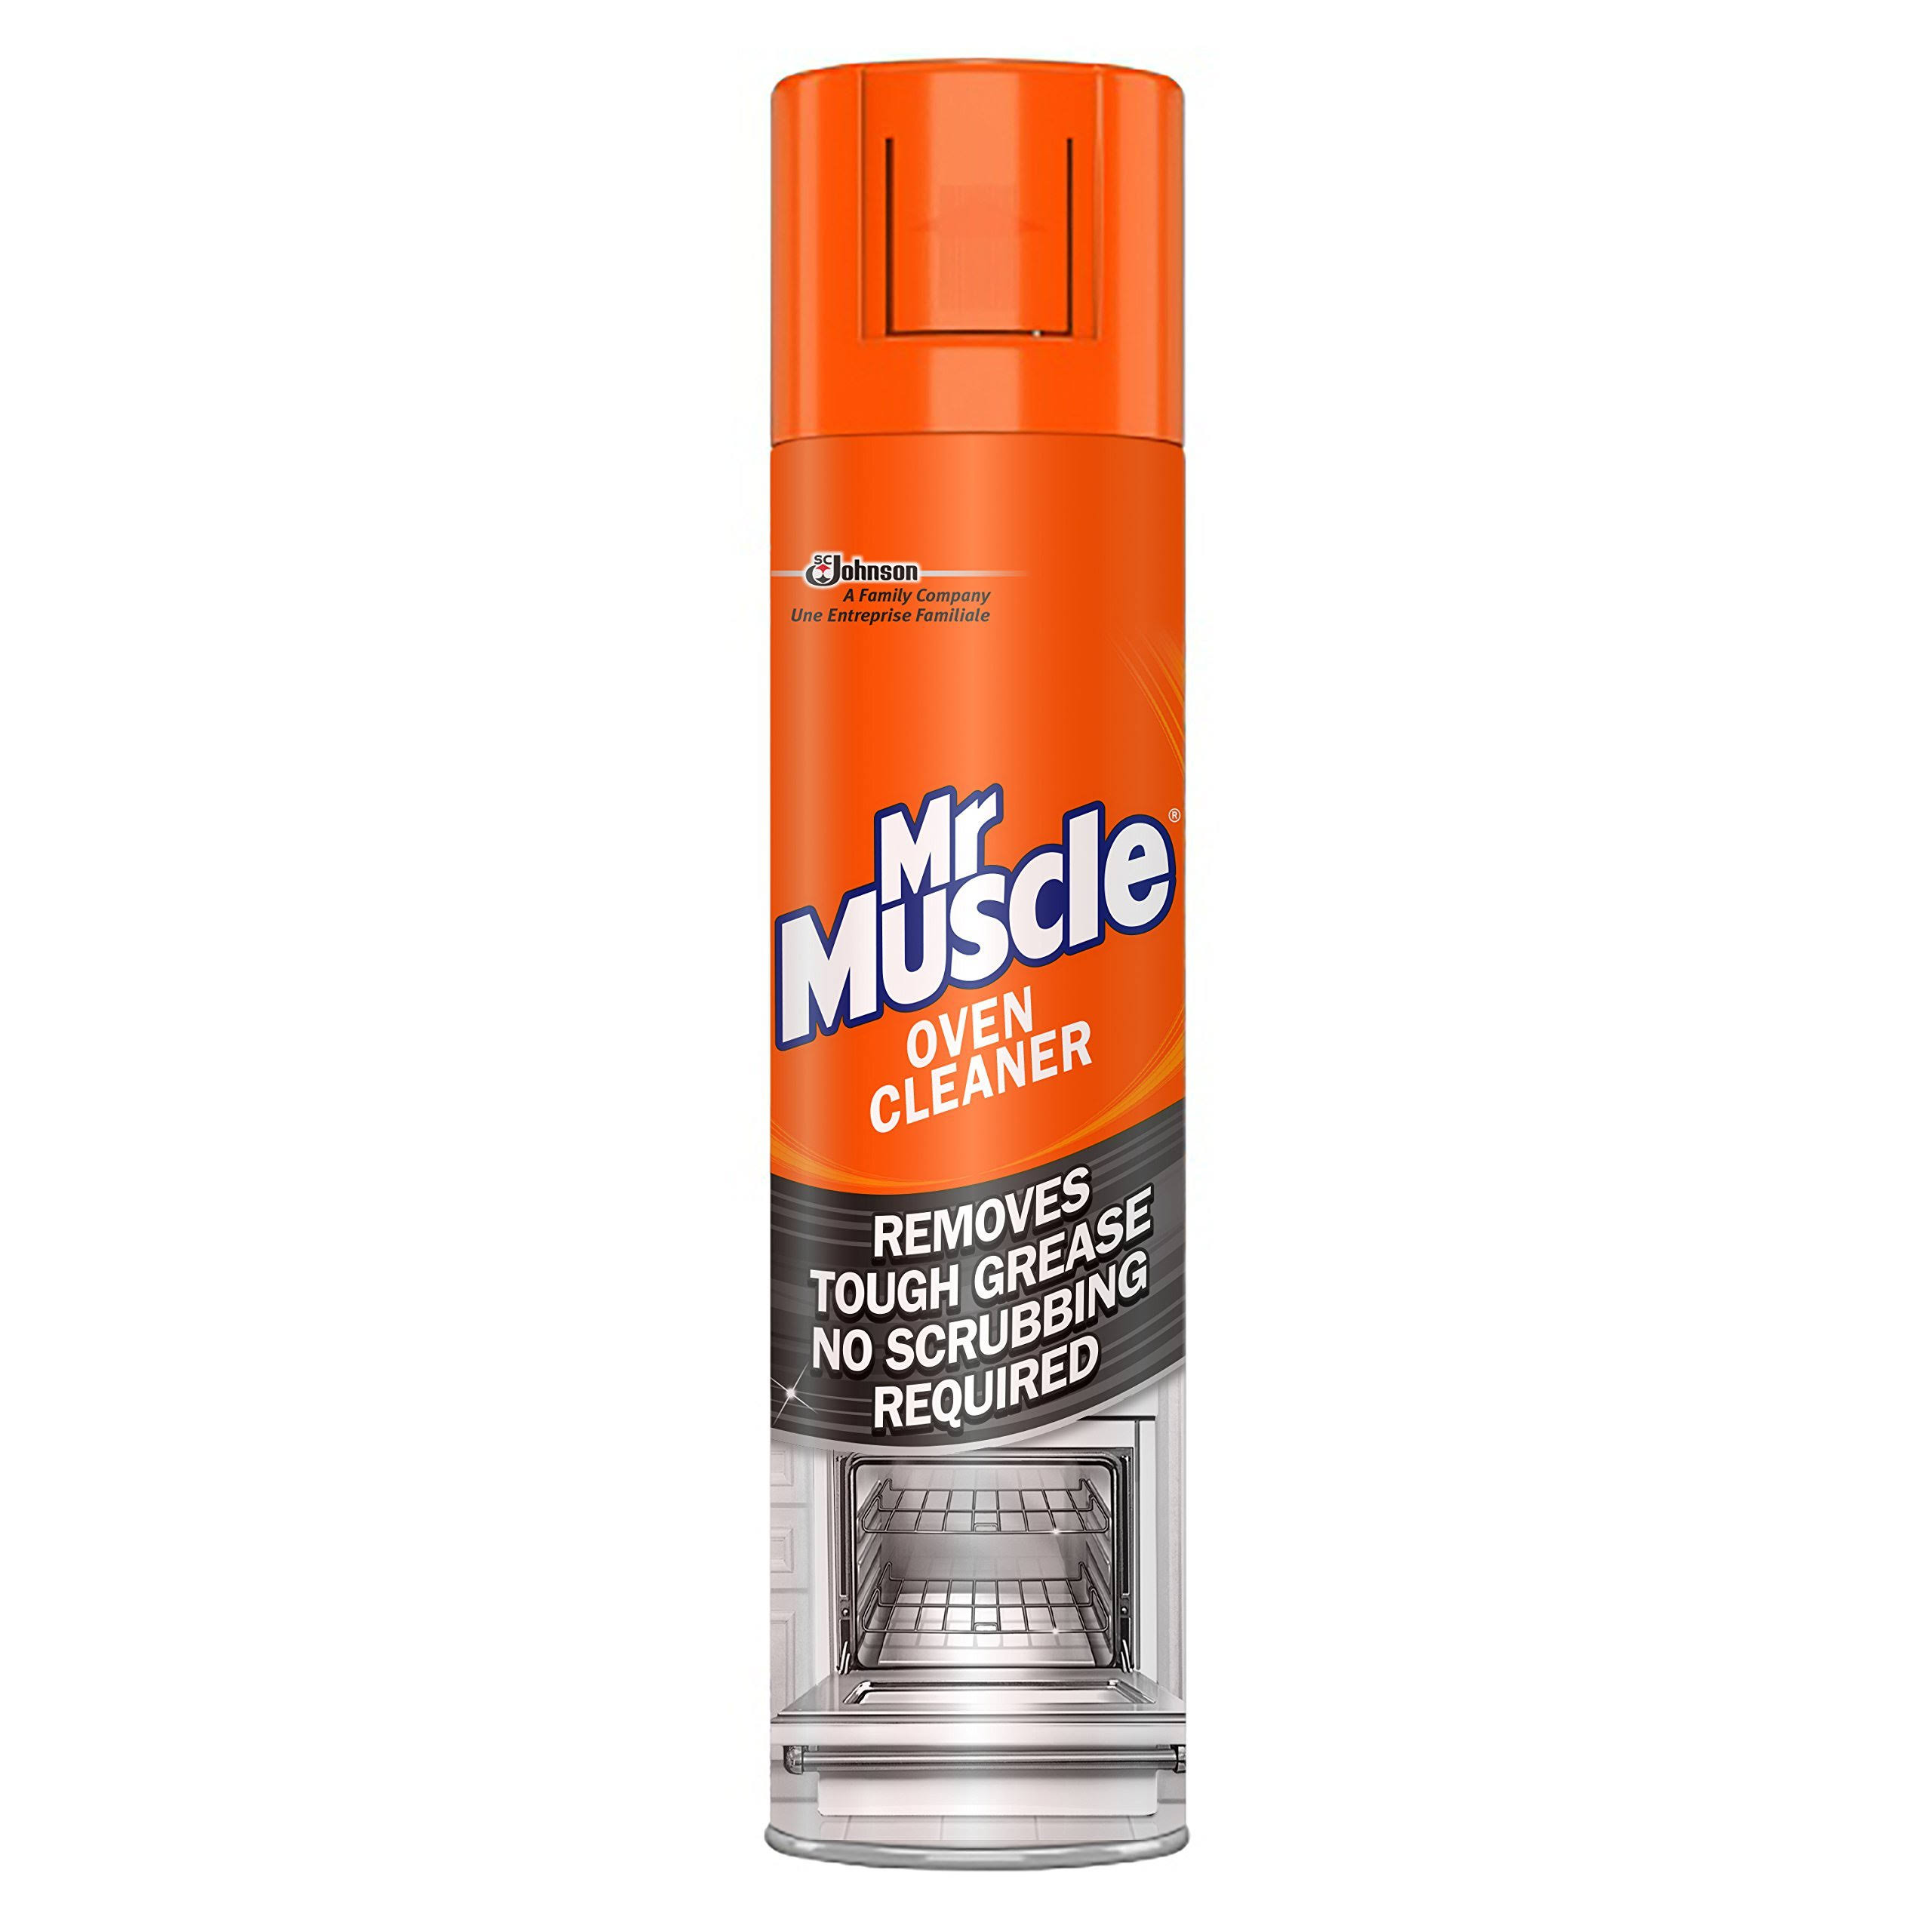 Mr Muscle Oven Cleaner - 300ml